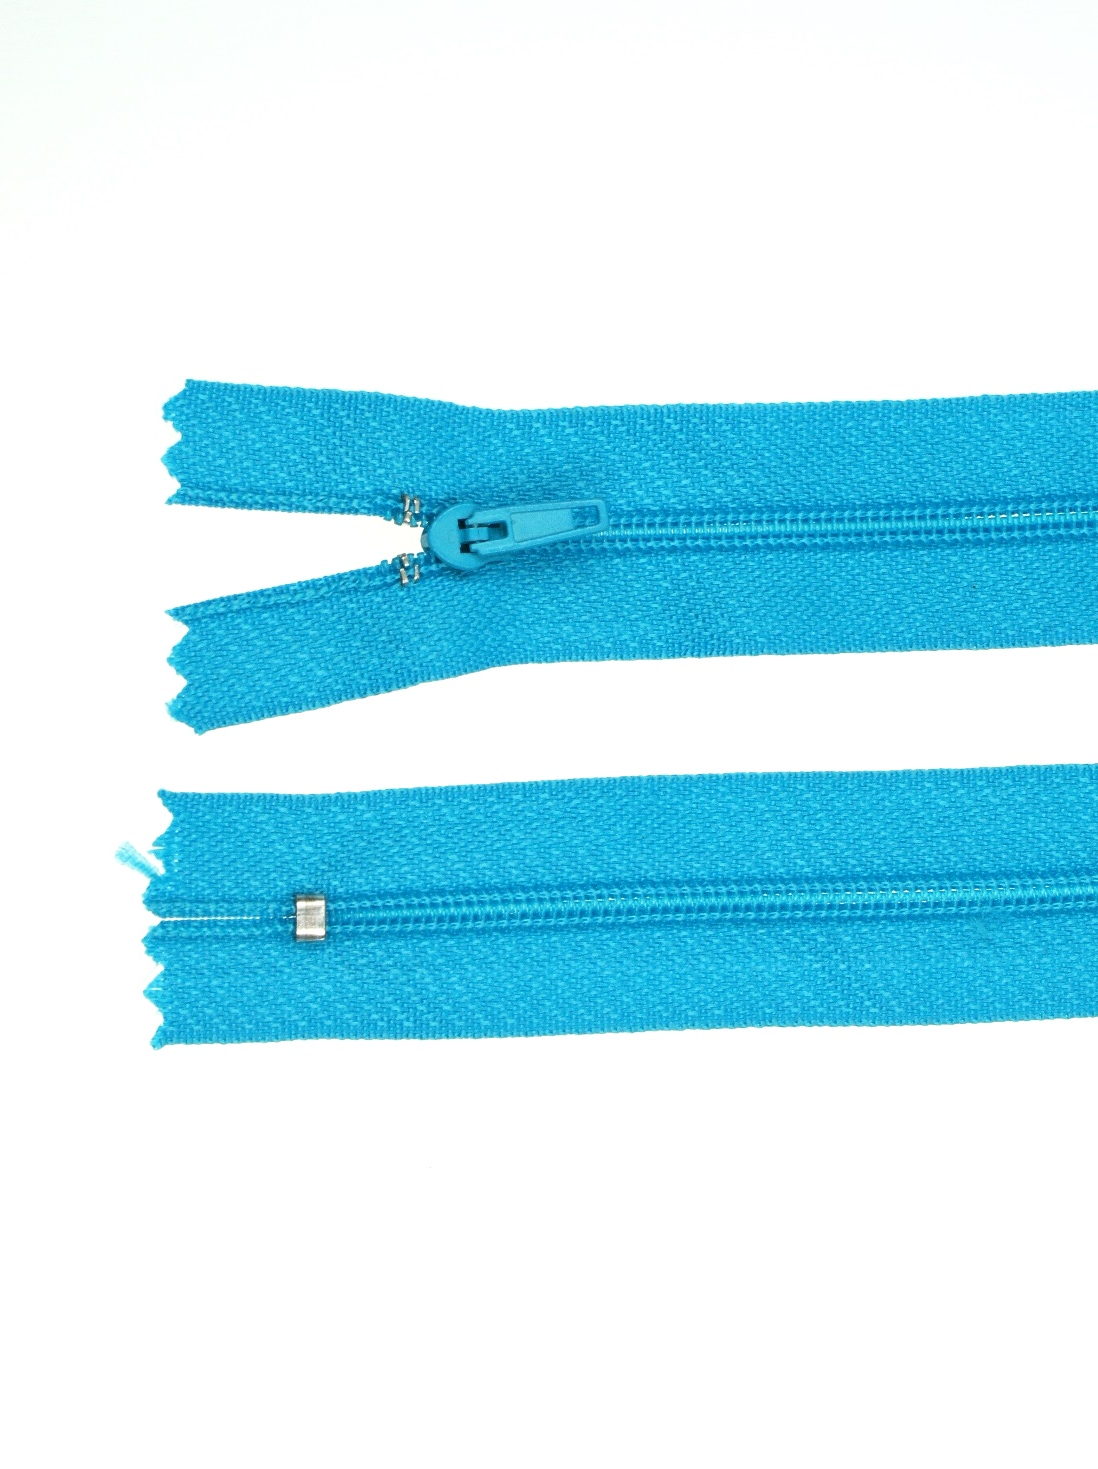 Picture of 25 zippers 3mm - 20cm long - color: turquoise